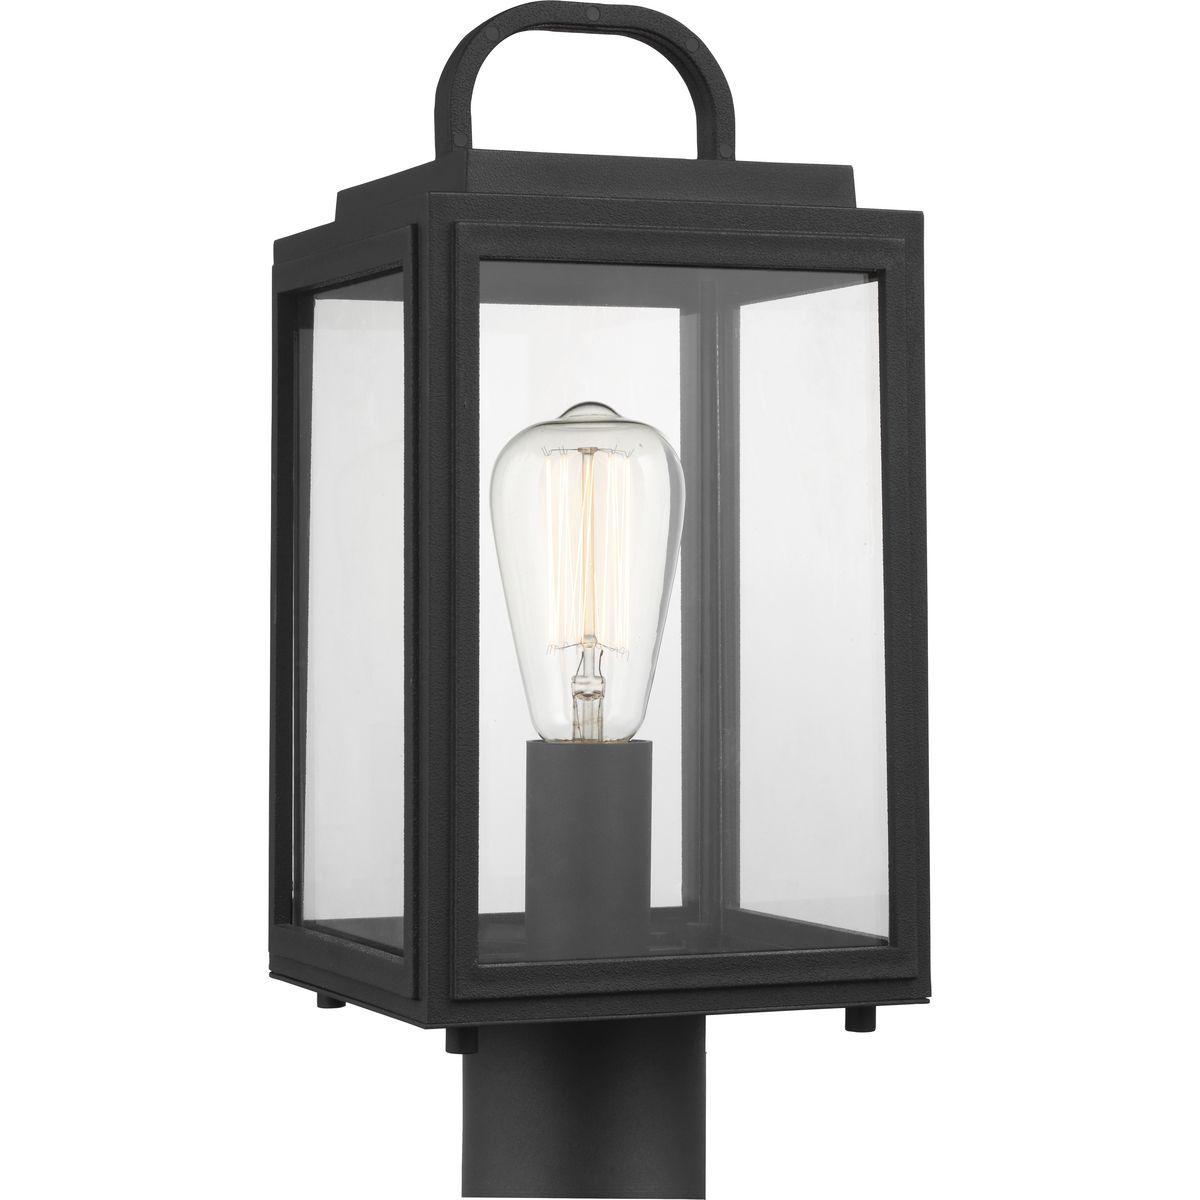 Hubbell P540064-031 Partner timeless elegance with a pinch of coastal vibe with this post lantern. A beautiful black square frame crafted from corrosion-proof composite polymer material features a half loop on top of the structure. The light fixture's clear glass panes allow